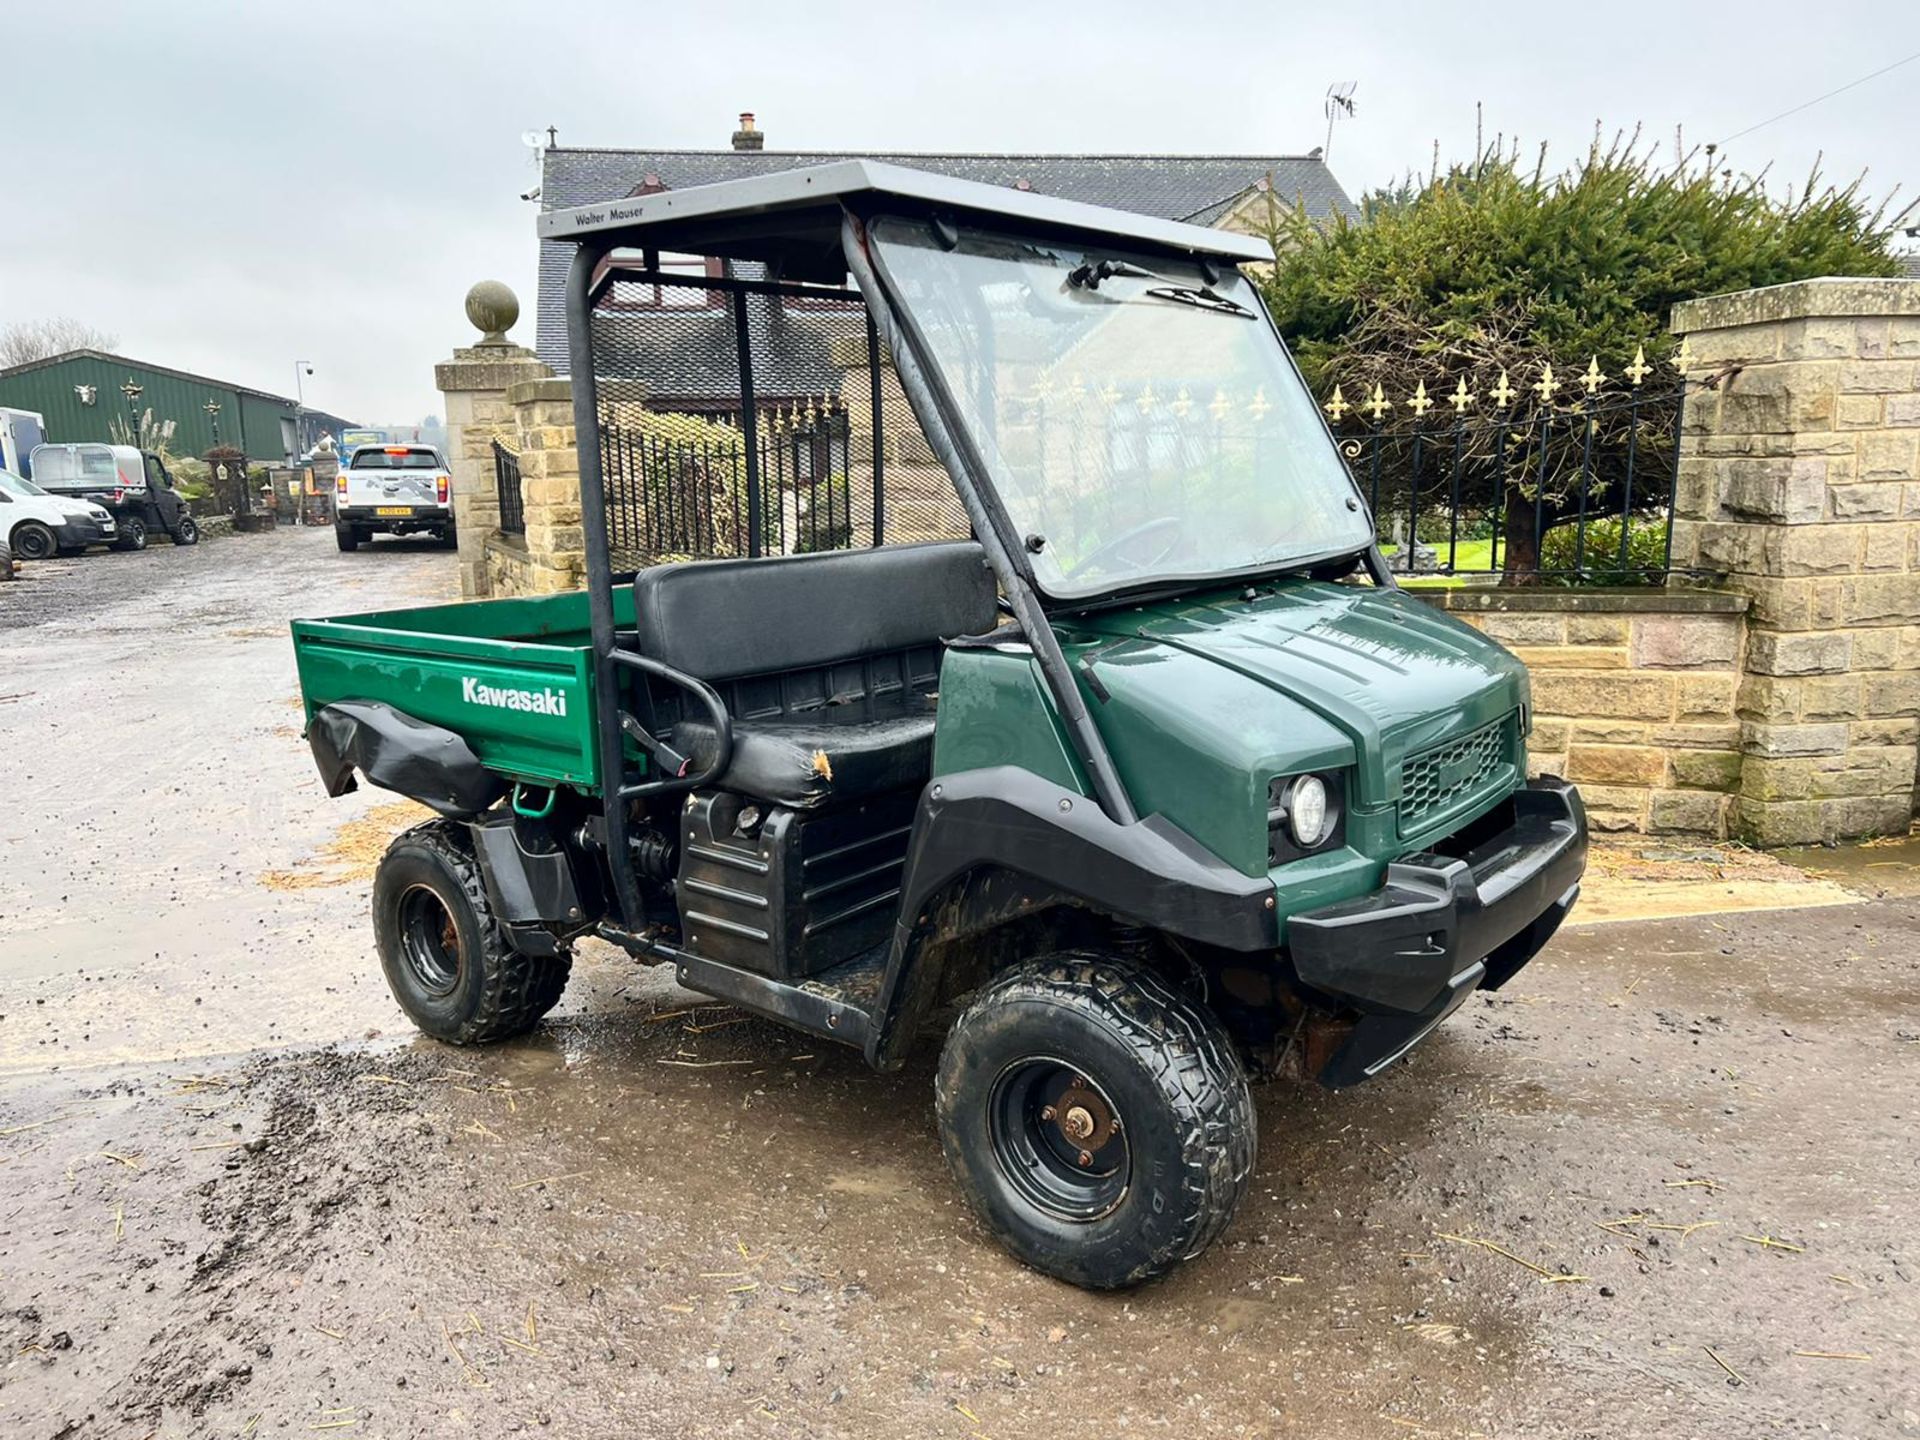 2009 Kawasaki Mule 4010 Buggy, Runs And Drives, Showing A Low 2425 Hours! *PLUS VAT*